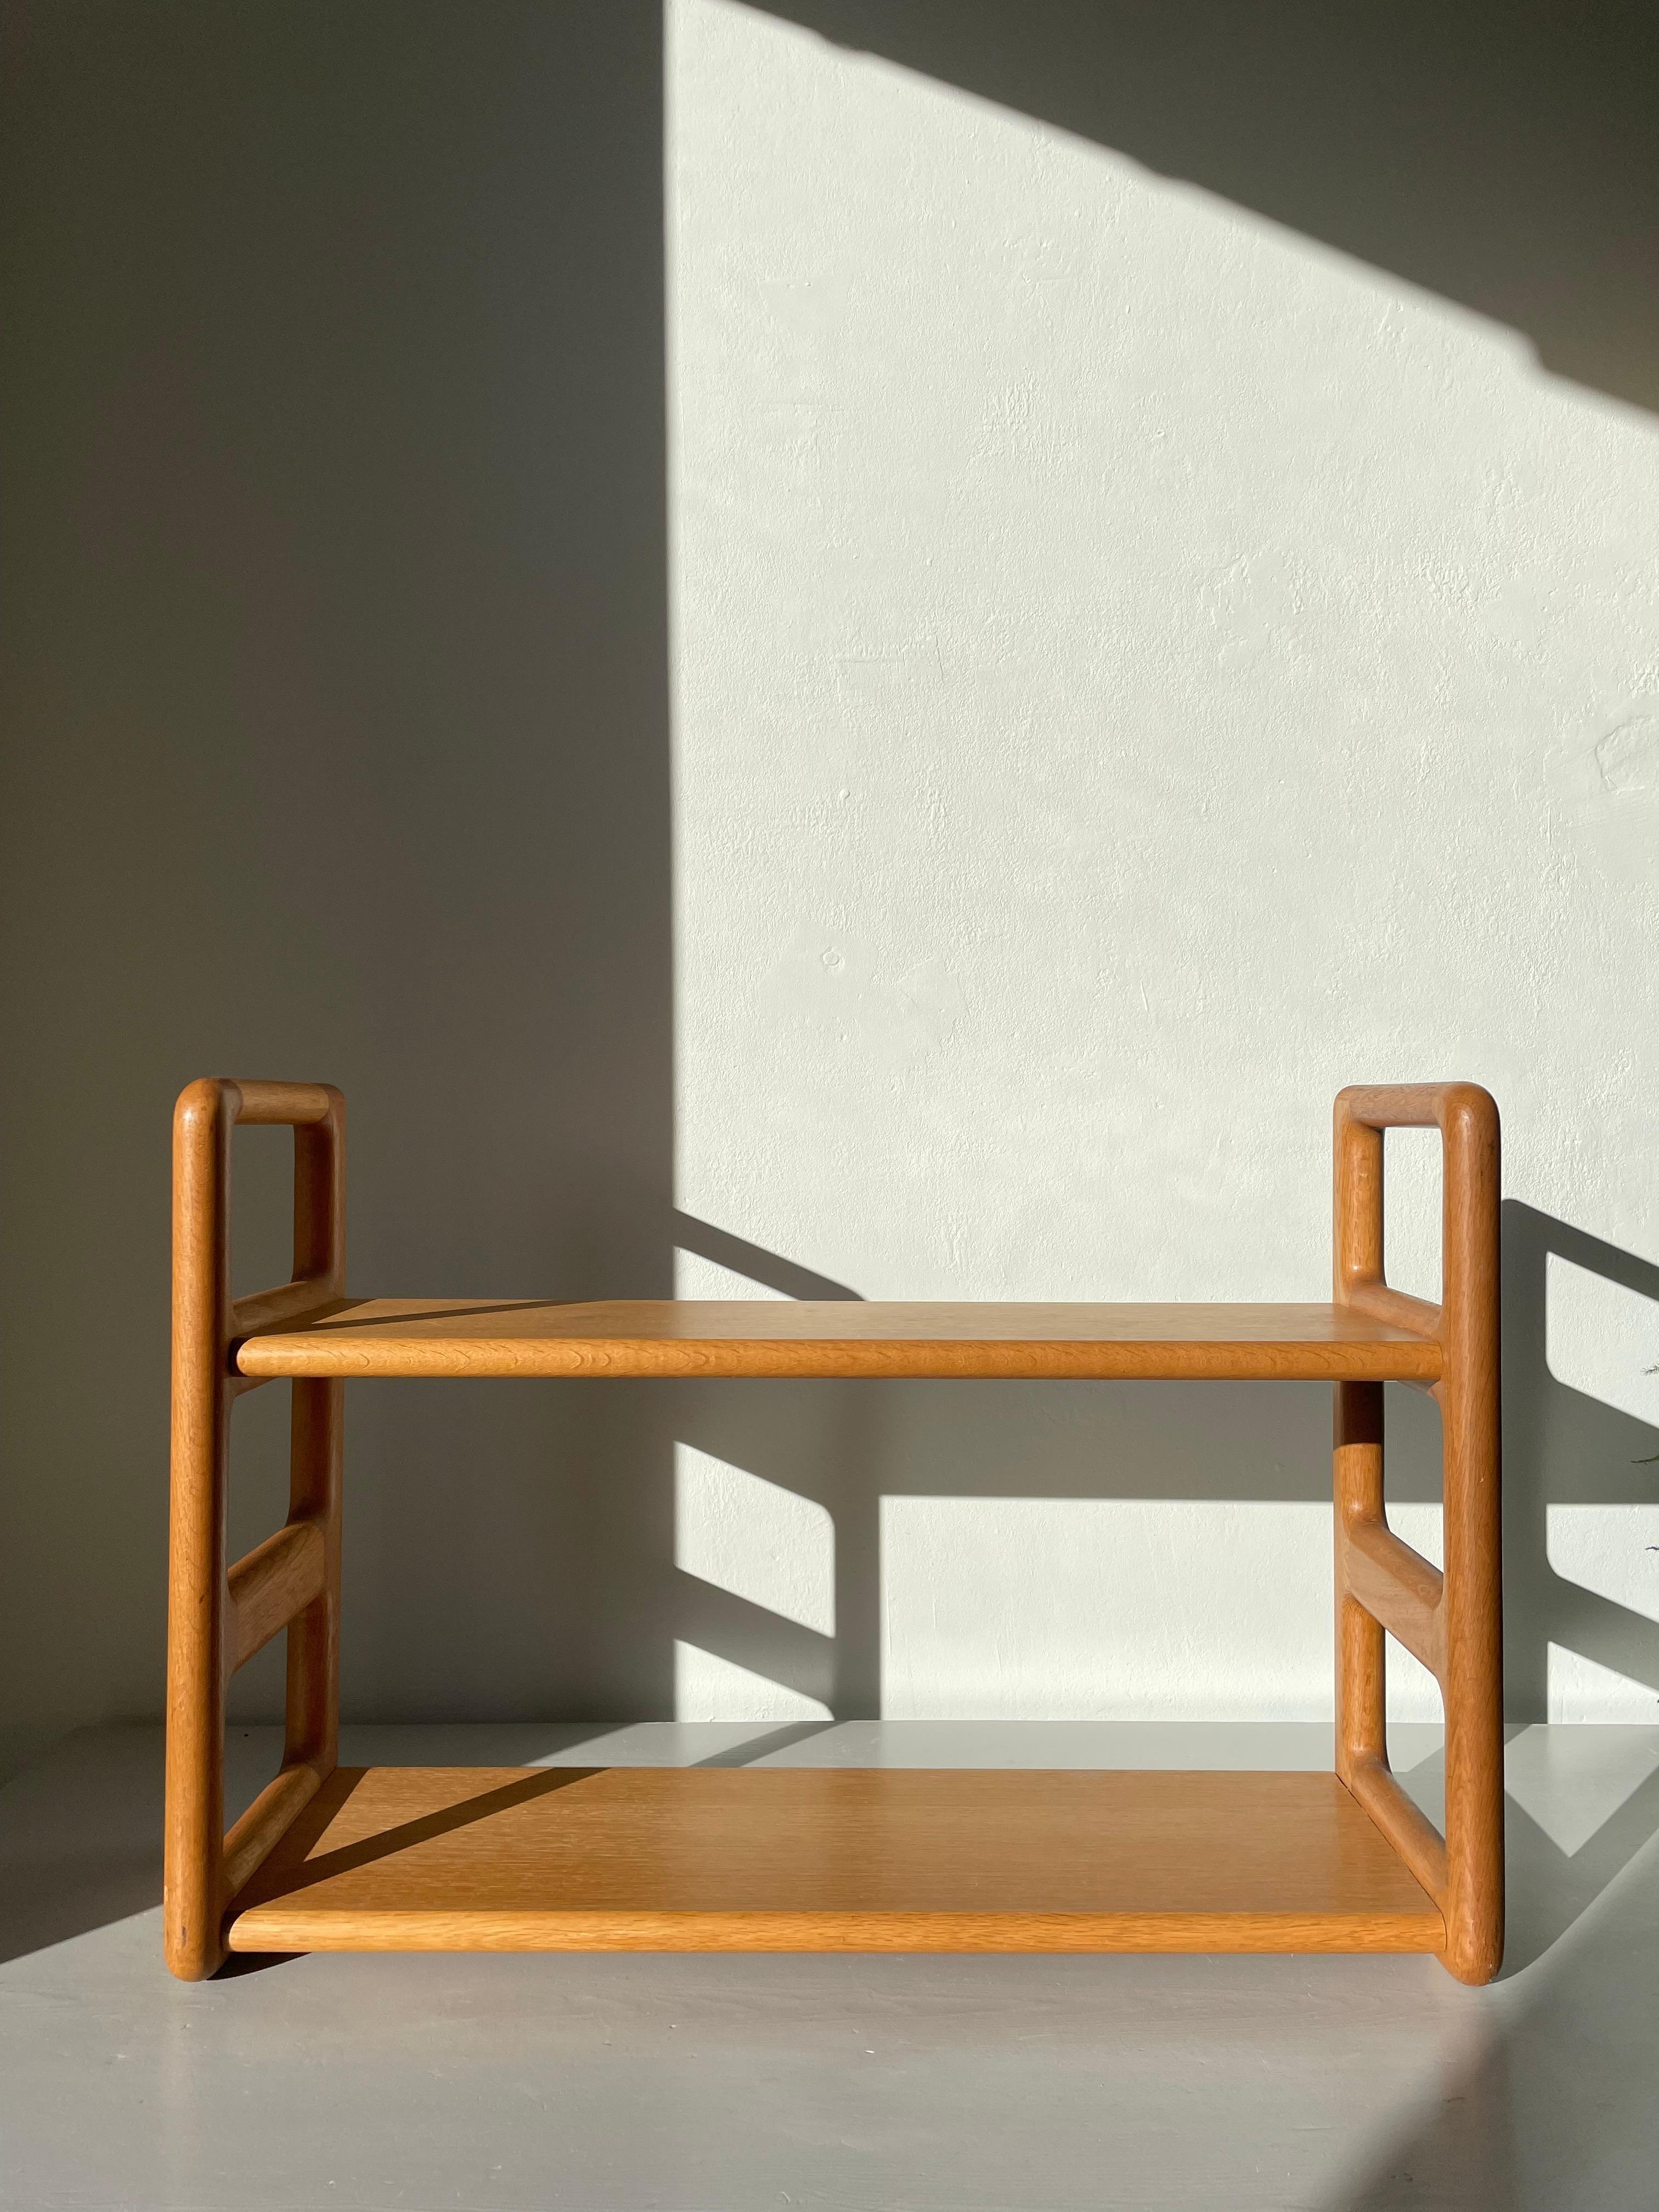 Rare handmade solitary teak wall unit with two shelves designed by acclaimed Danish designer Poul Cadovius in the 1960s. Solid smoothly rounded wooden brackets on which two shelves are attached. Simple and functional modernist design. Metal mount on